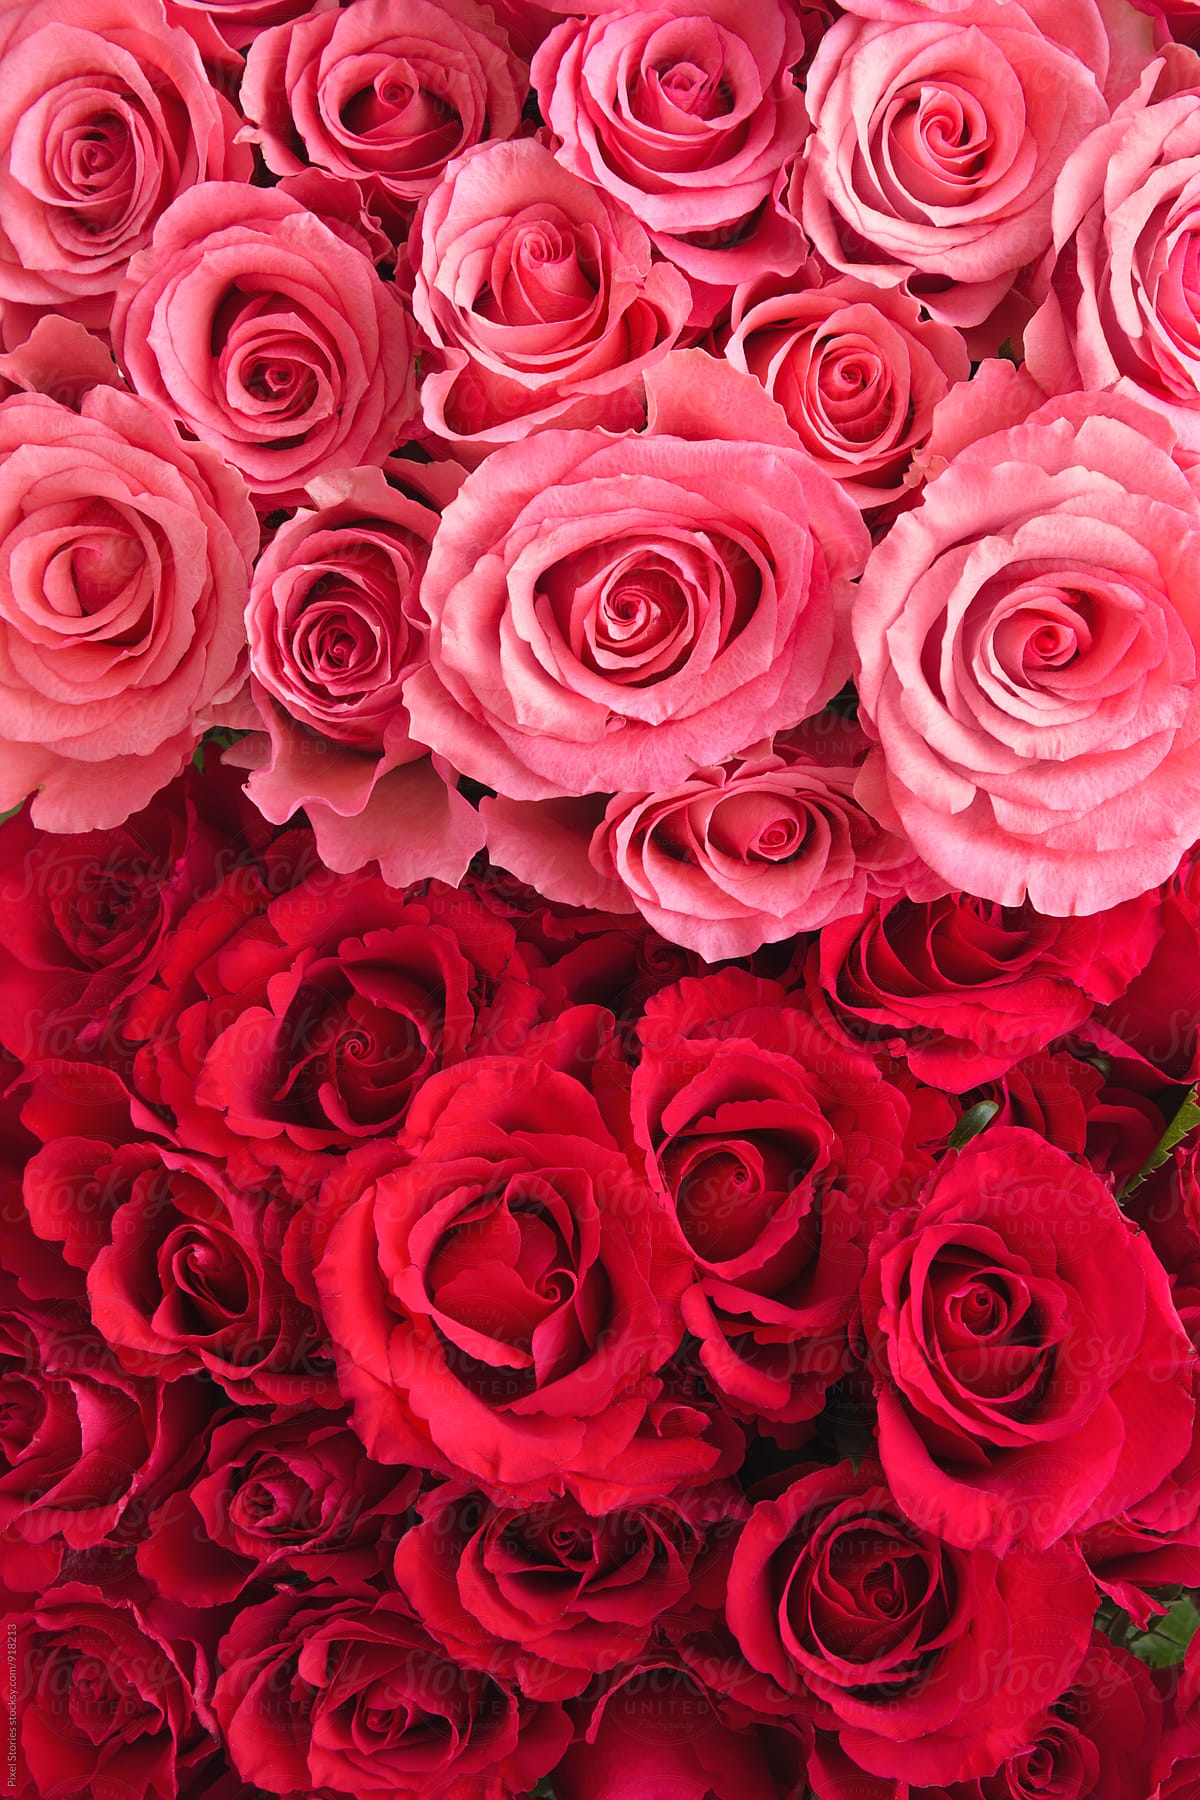 Pink And Red Roses Bouquet Background by Stocksy Contributor Pixel  Stories - Stocksy